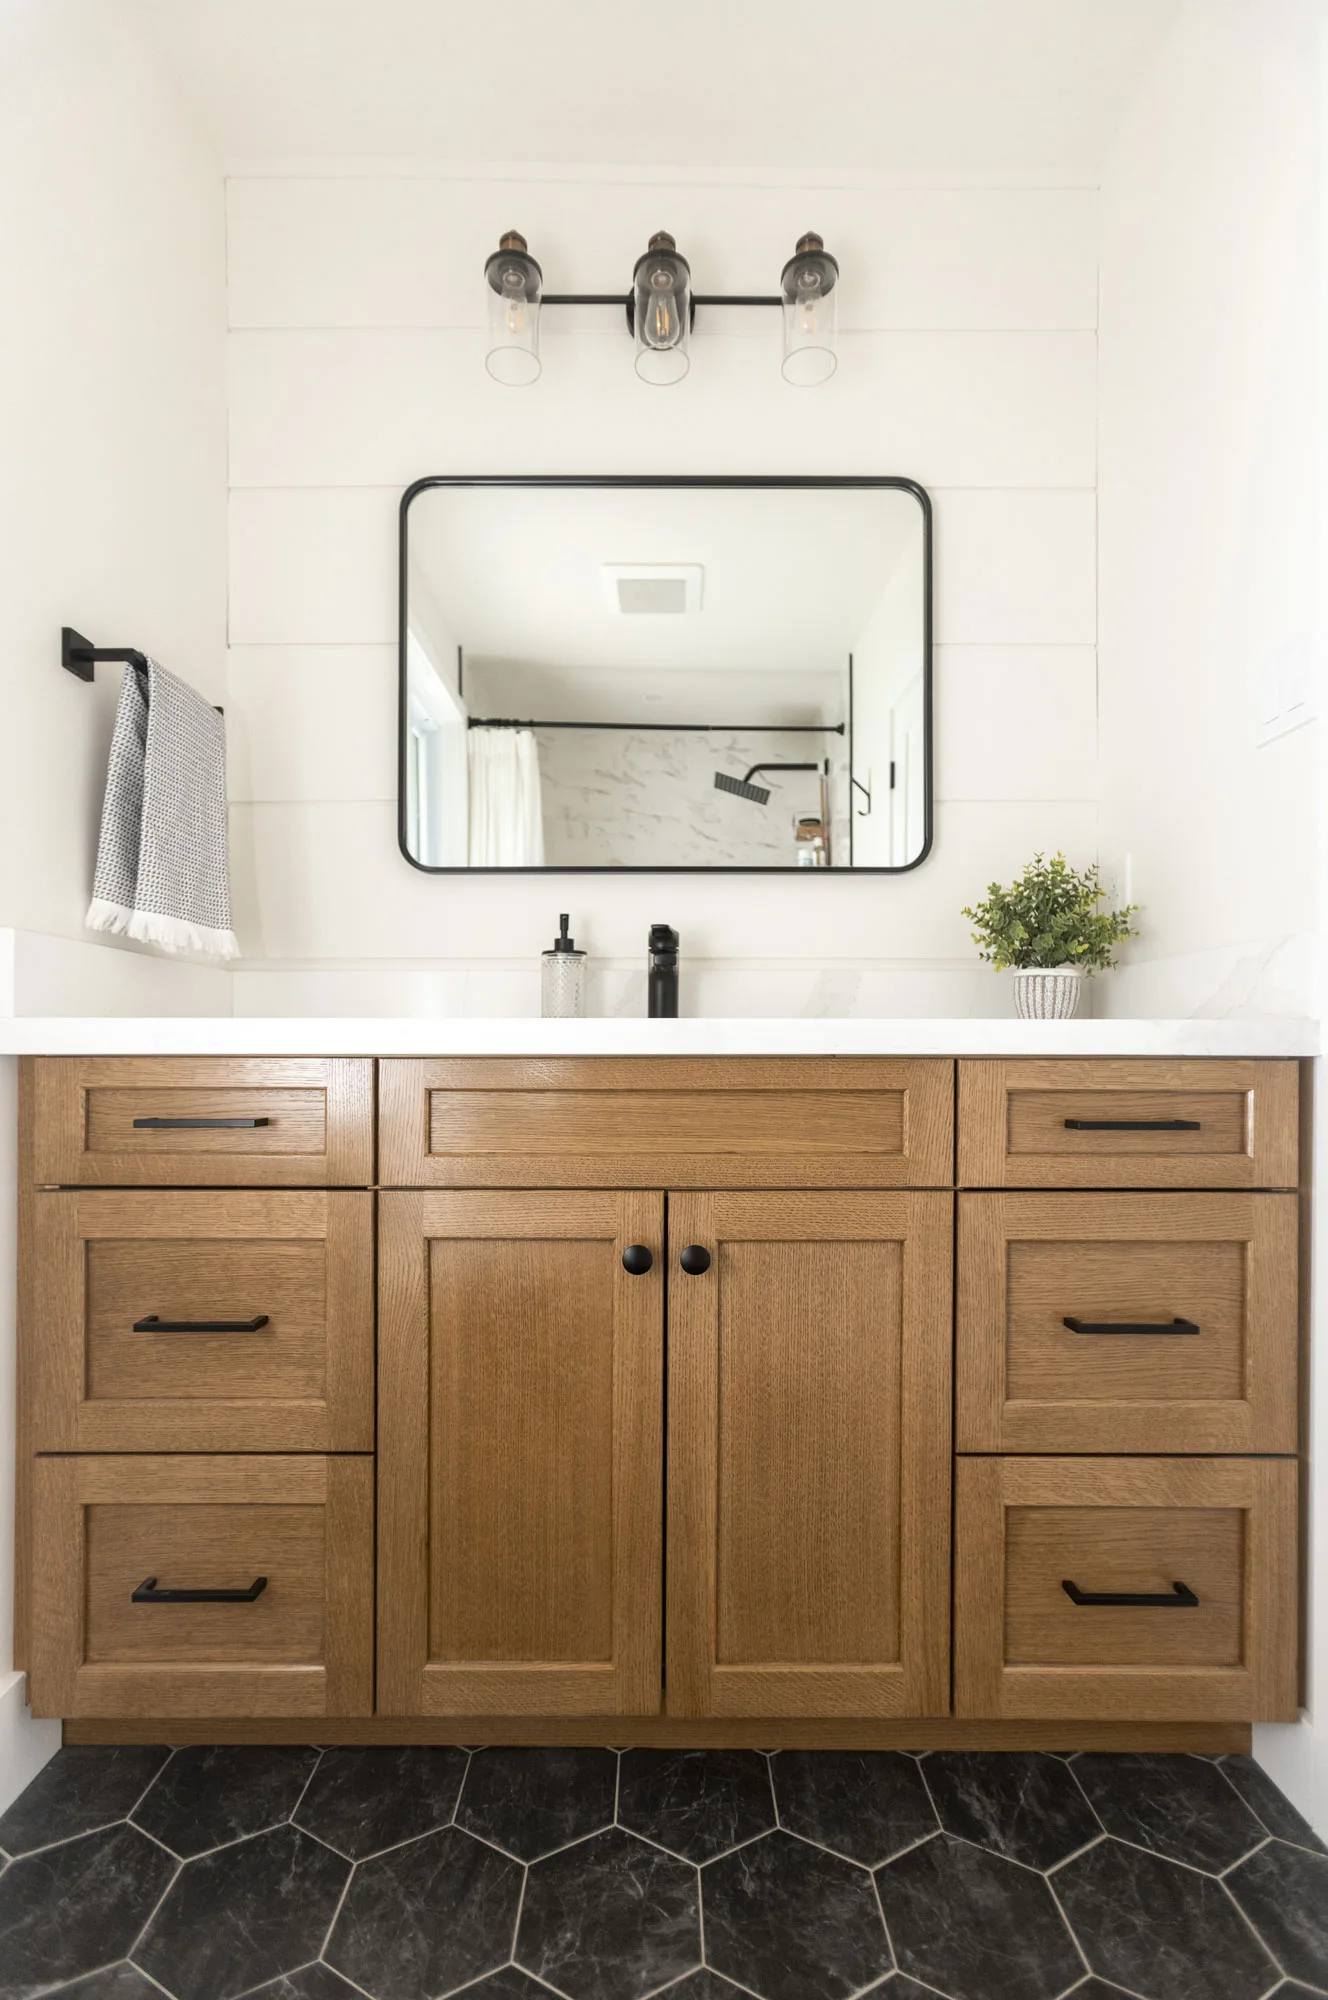 a bathroom cabinet accented with black handles and a black trimmed rectangular mirror with a vintage 3 light overtop